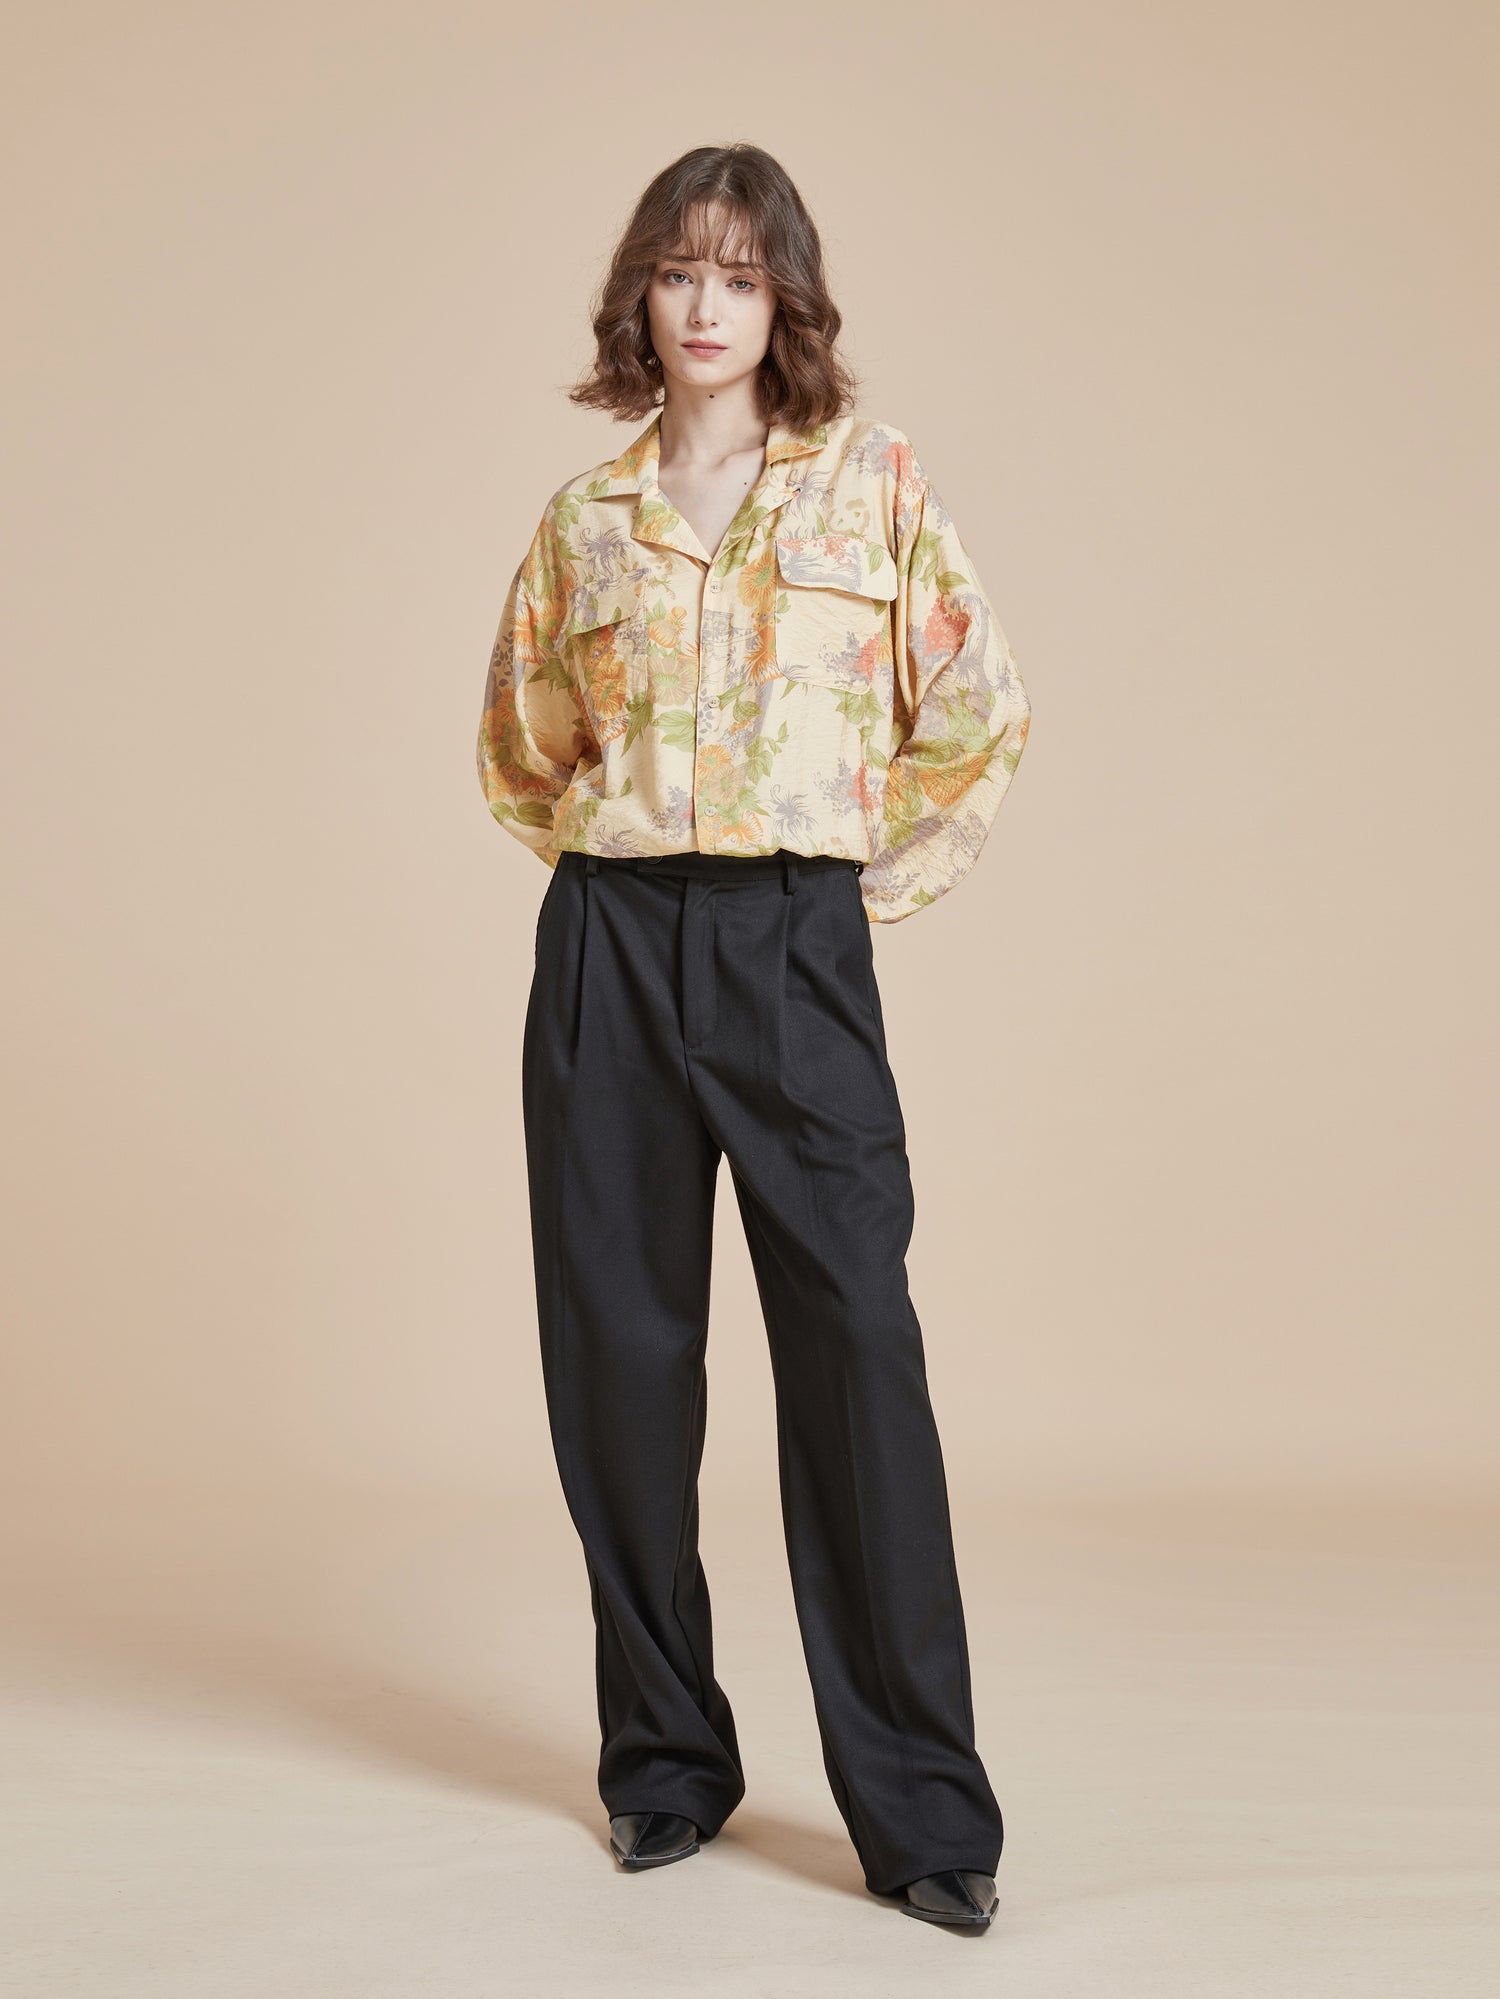 A model wearing a yellow shirt featuring Meraj Vase Pot motifs and black wide leg pants. (Brand name: Found)